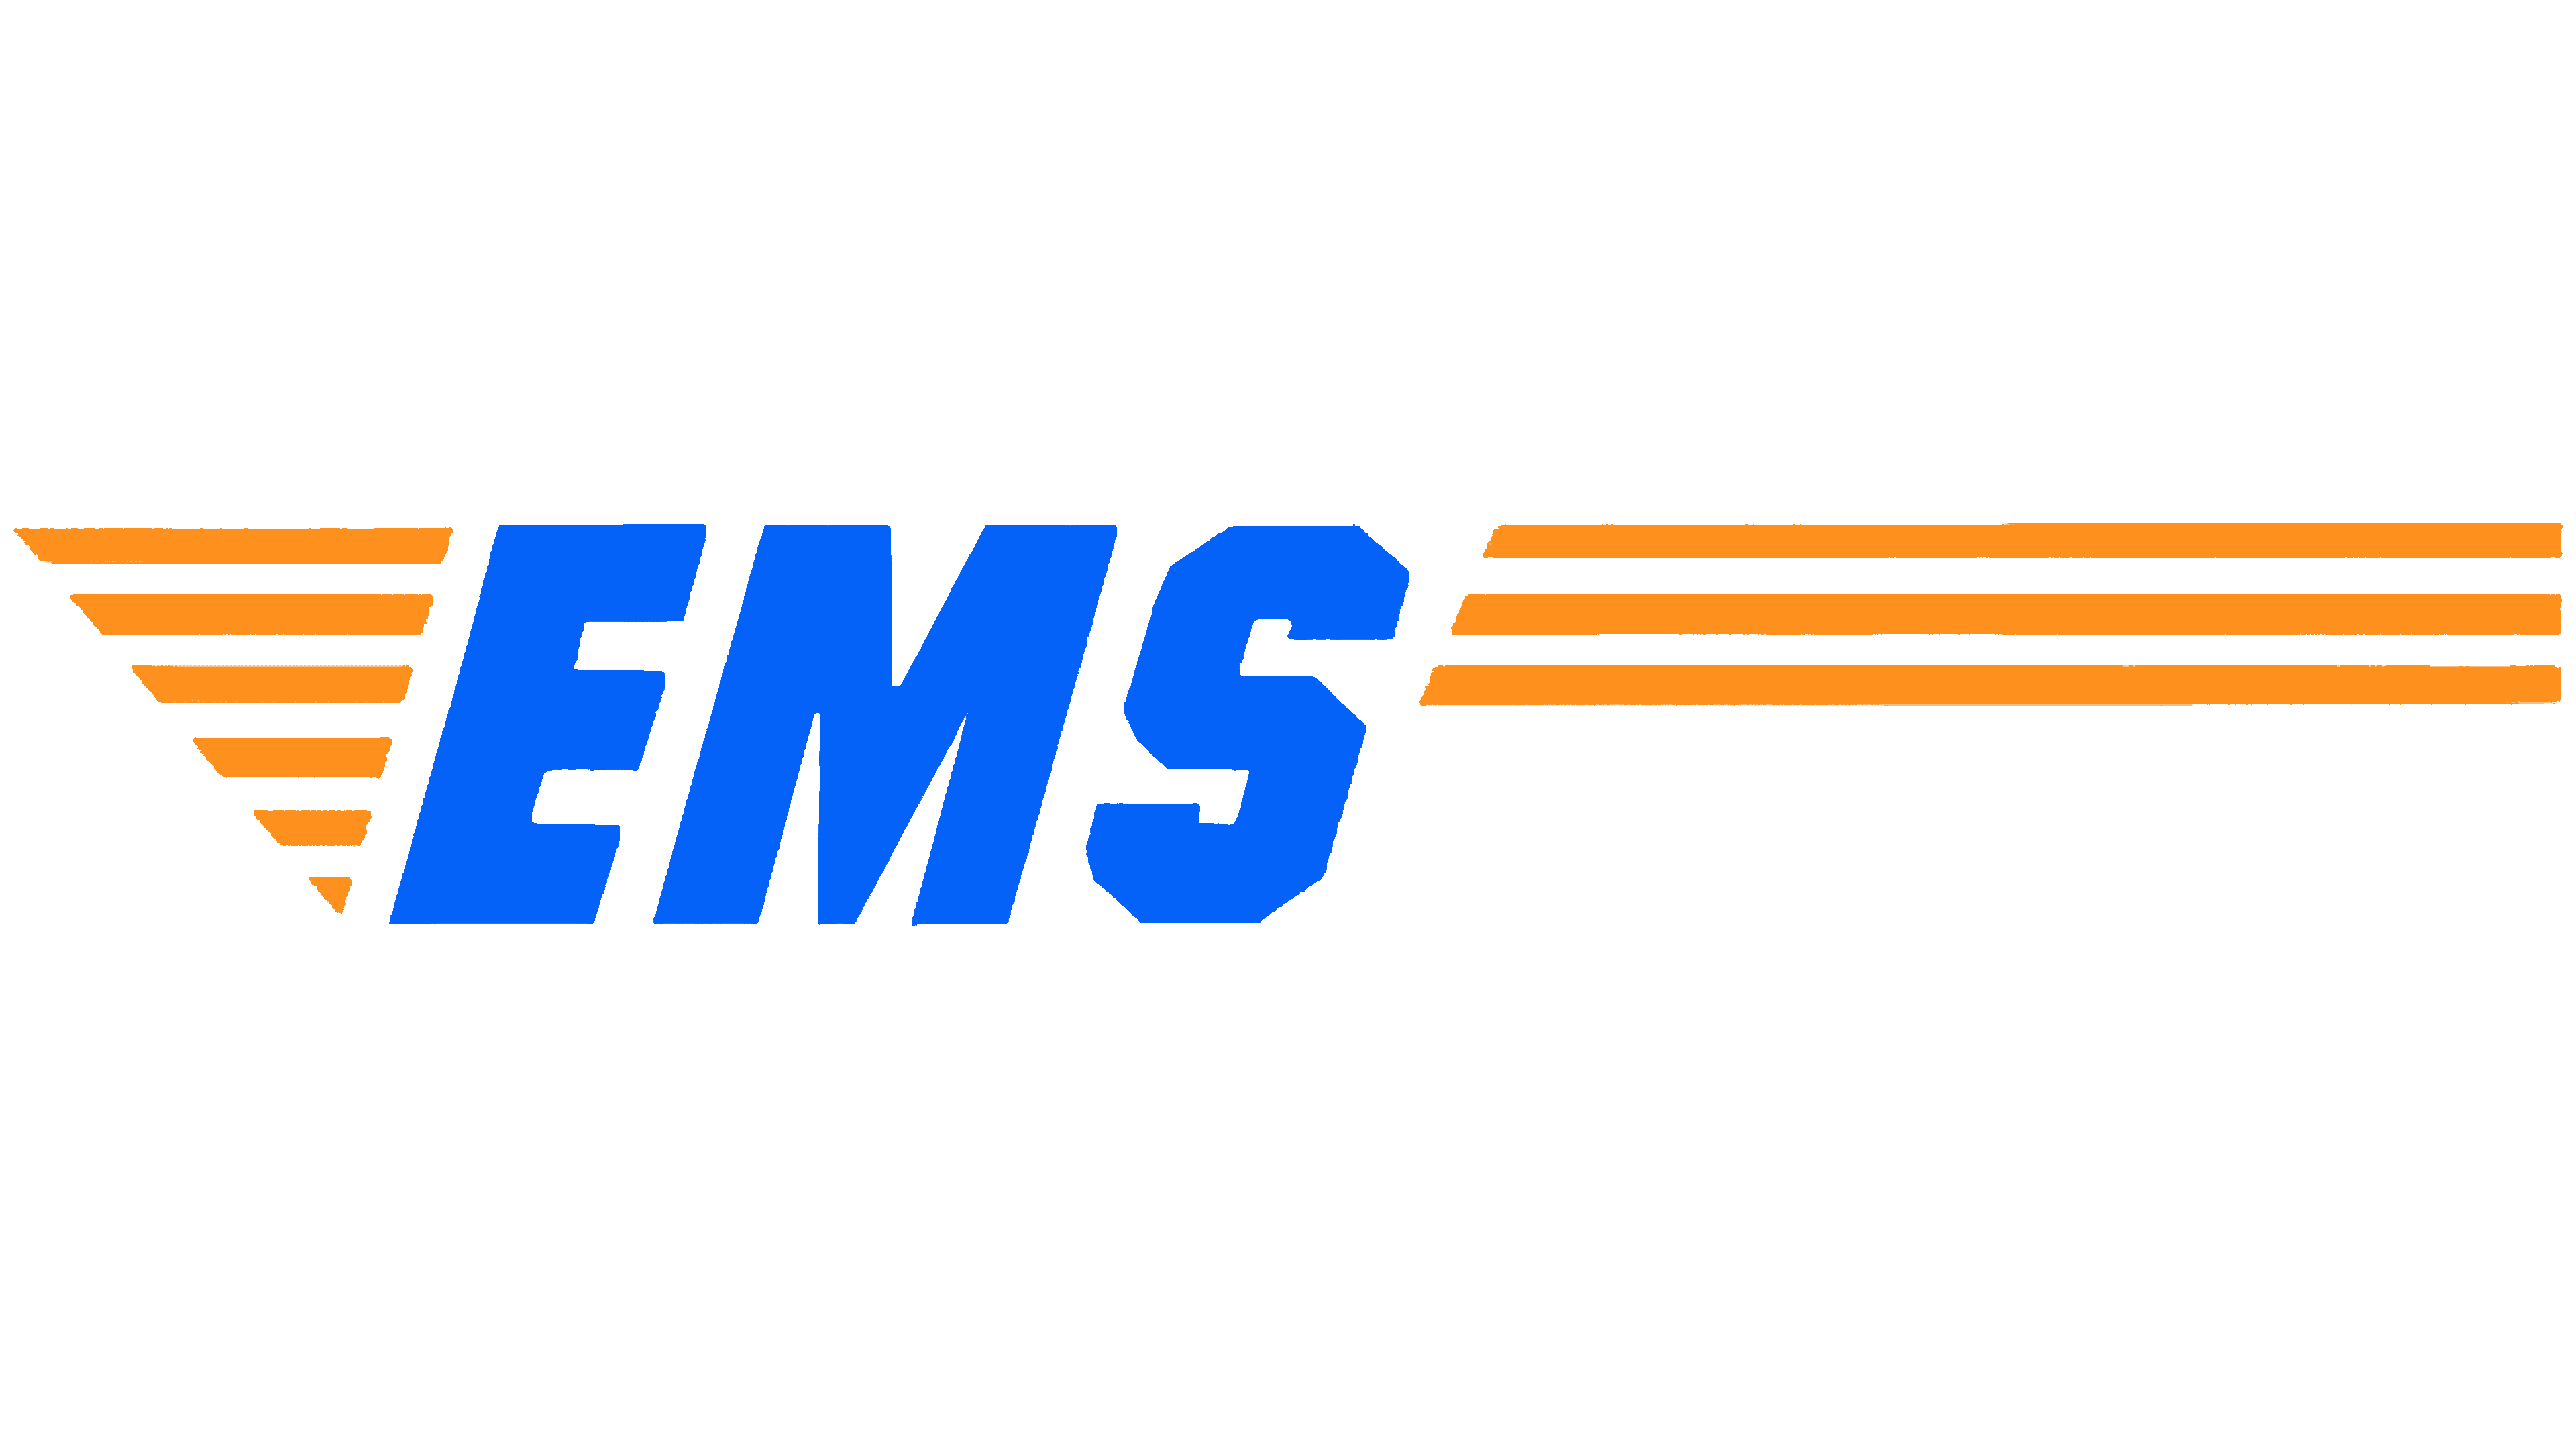 Express Mail Service (EMS) Logo, symbol, meaning, PNG, brand